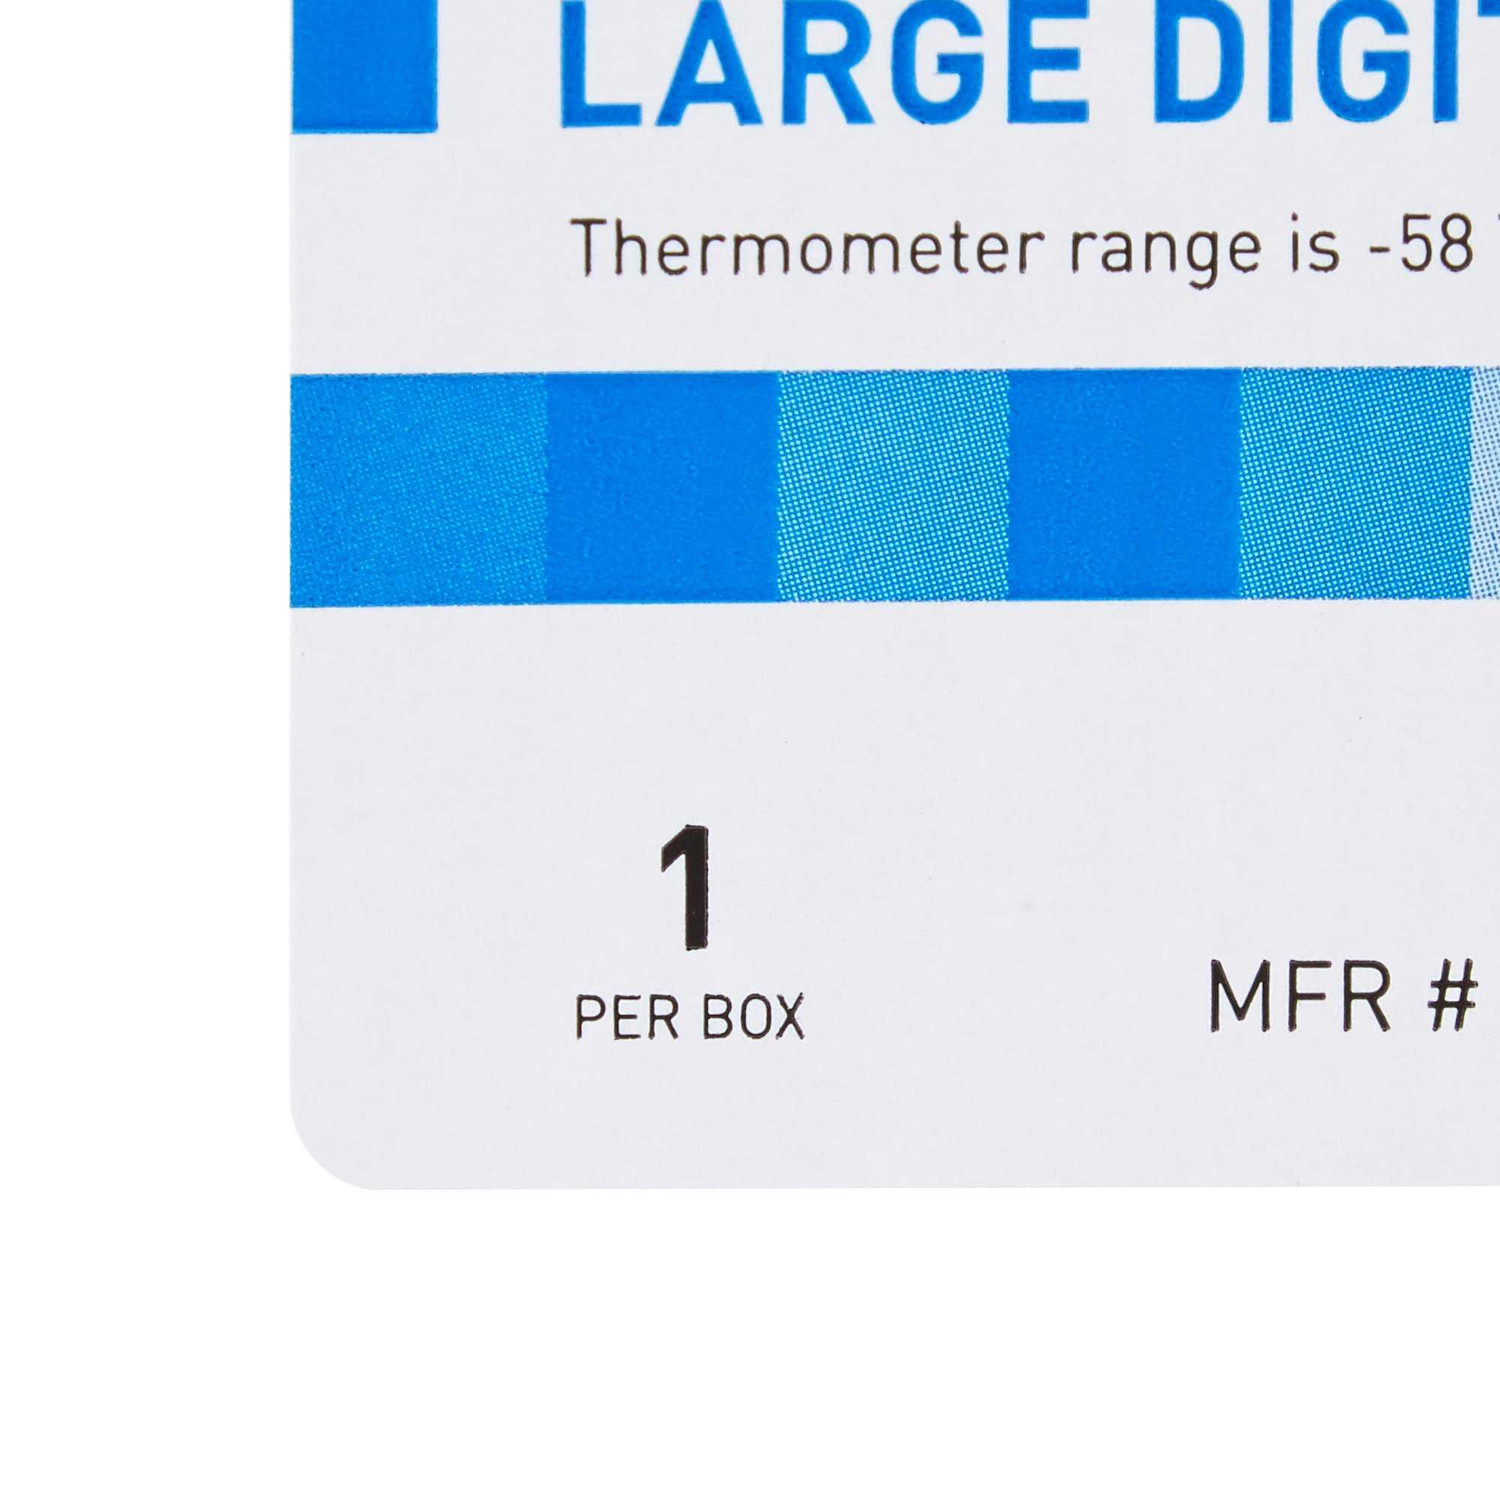 https://cdn11.bigcommerce.com/s-1l9d1d1d79/images/stencil/1500x1500/products/157035/311769/Digital-Refrigerator-Freezer-Thermometer-with-Alarm-McKesson-Fahrenheit-Celsius-58-to-158-F-50-to-70-C-Glycol-Bottle-Probe-Internal-Sensor-Multiple-Mounting-Opt_173673__48475.1682681874.jpg?c=2&imbypass=on